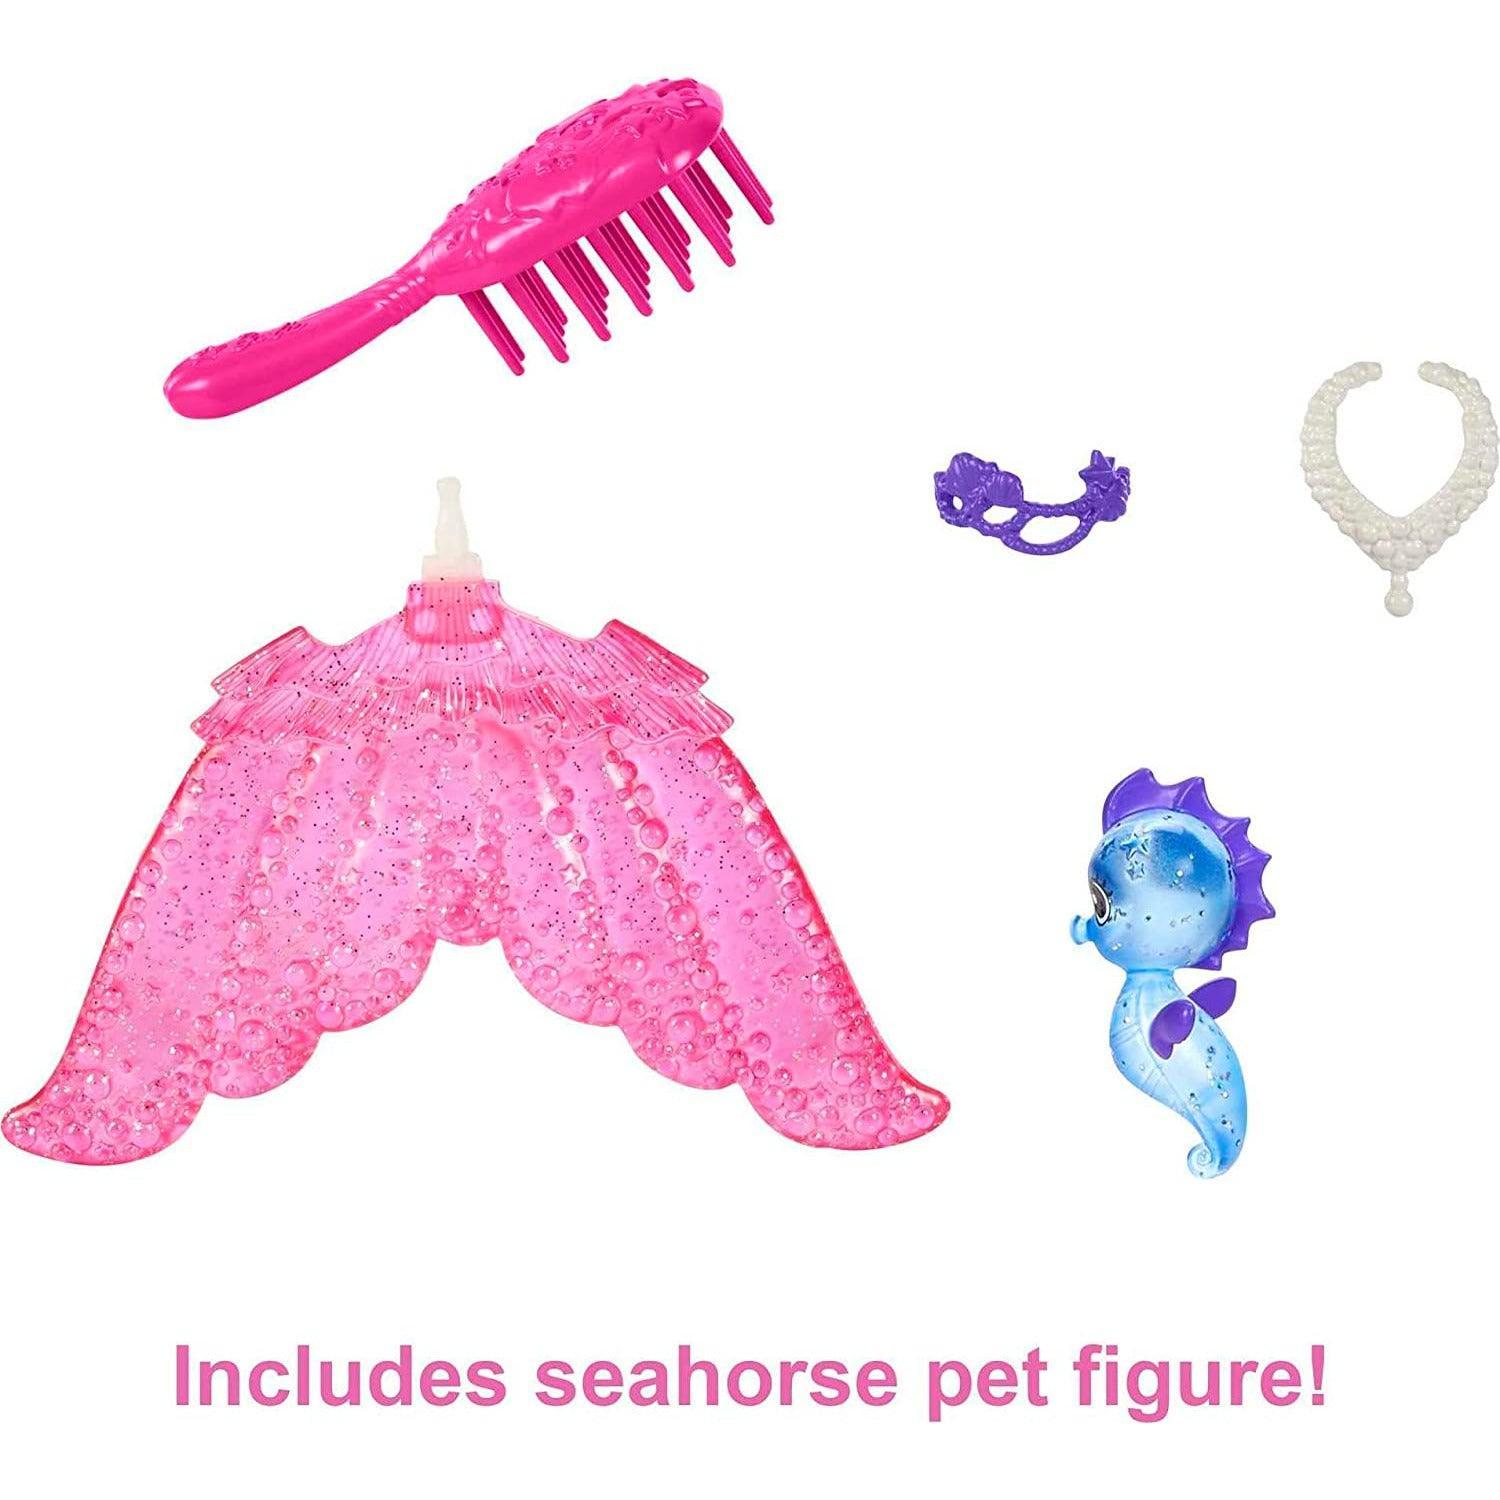 Barbie Malibu Mermaid Doll with Seahorse Pet and Accessories with Interchangeable Fins - BumbleToys - 5-7 Years, Barbie, Fashion Dolls & Accessories, Girls, Mermaid, Pre-Order